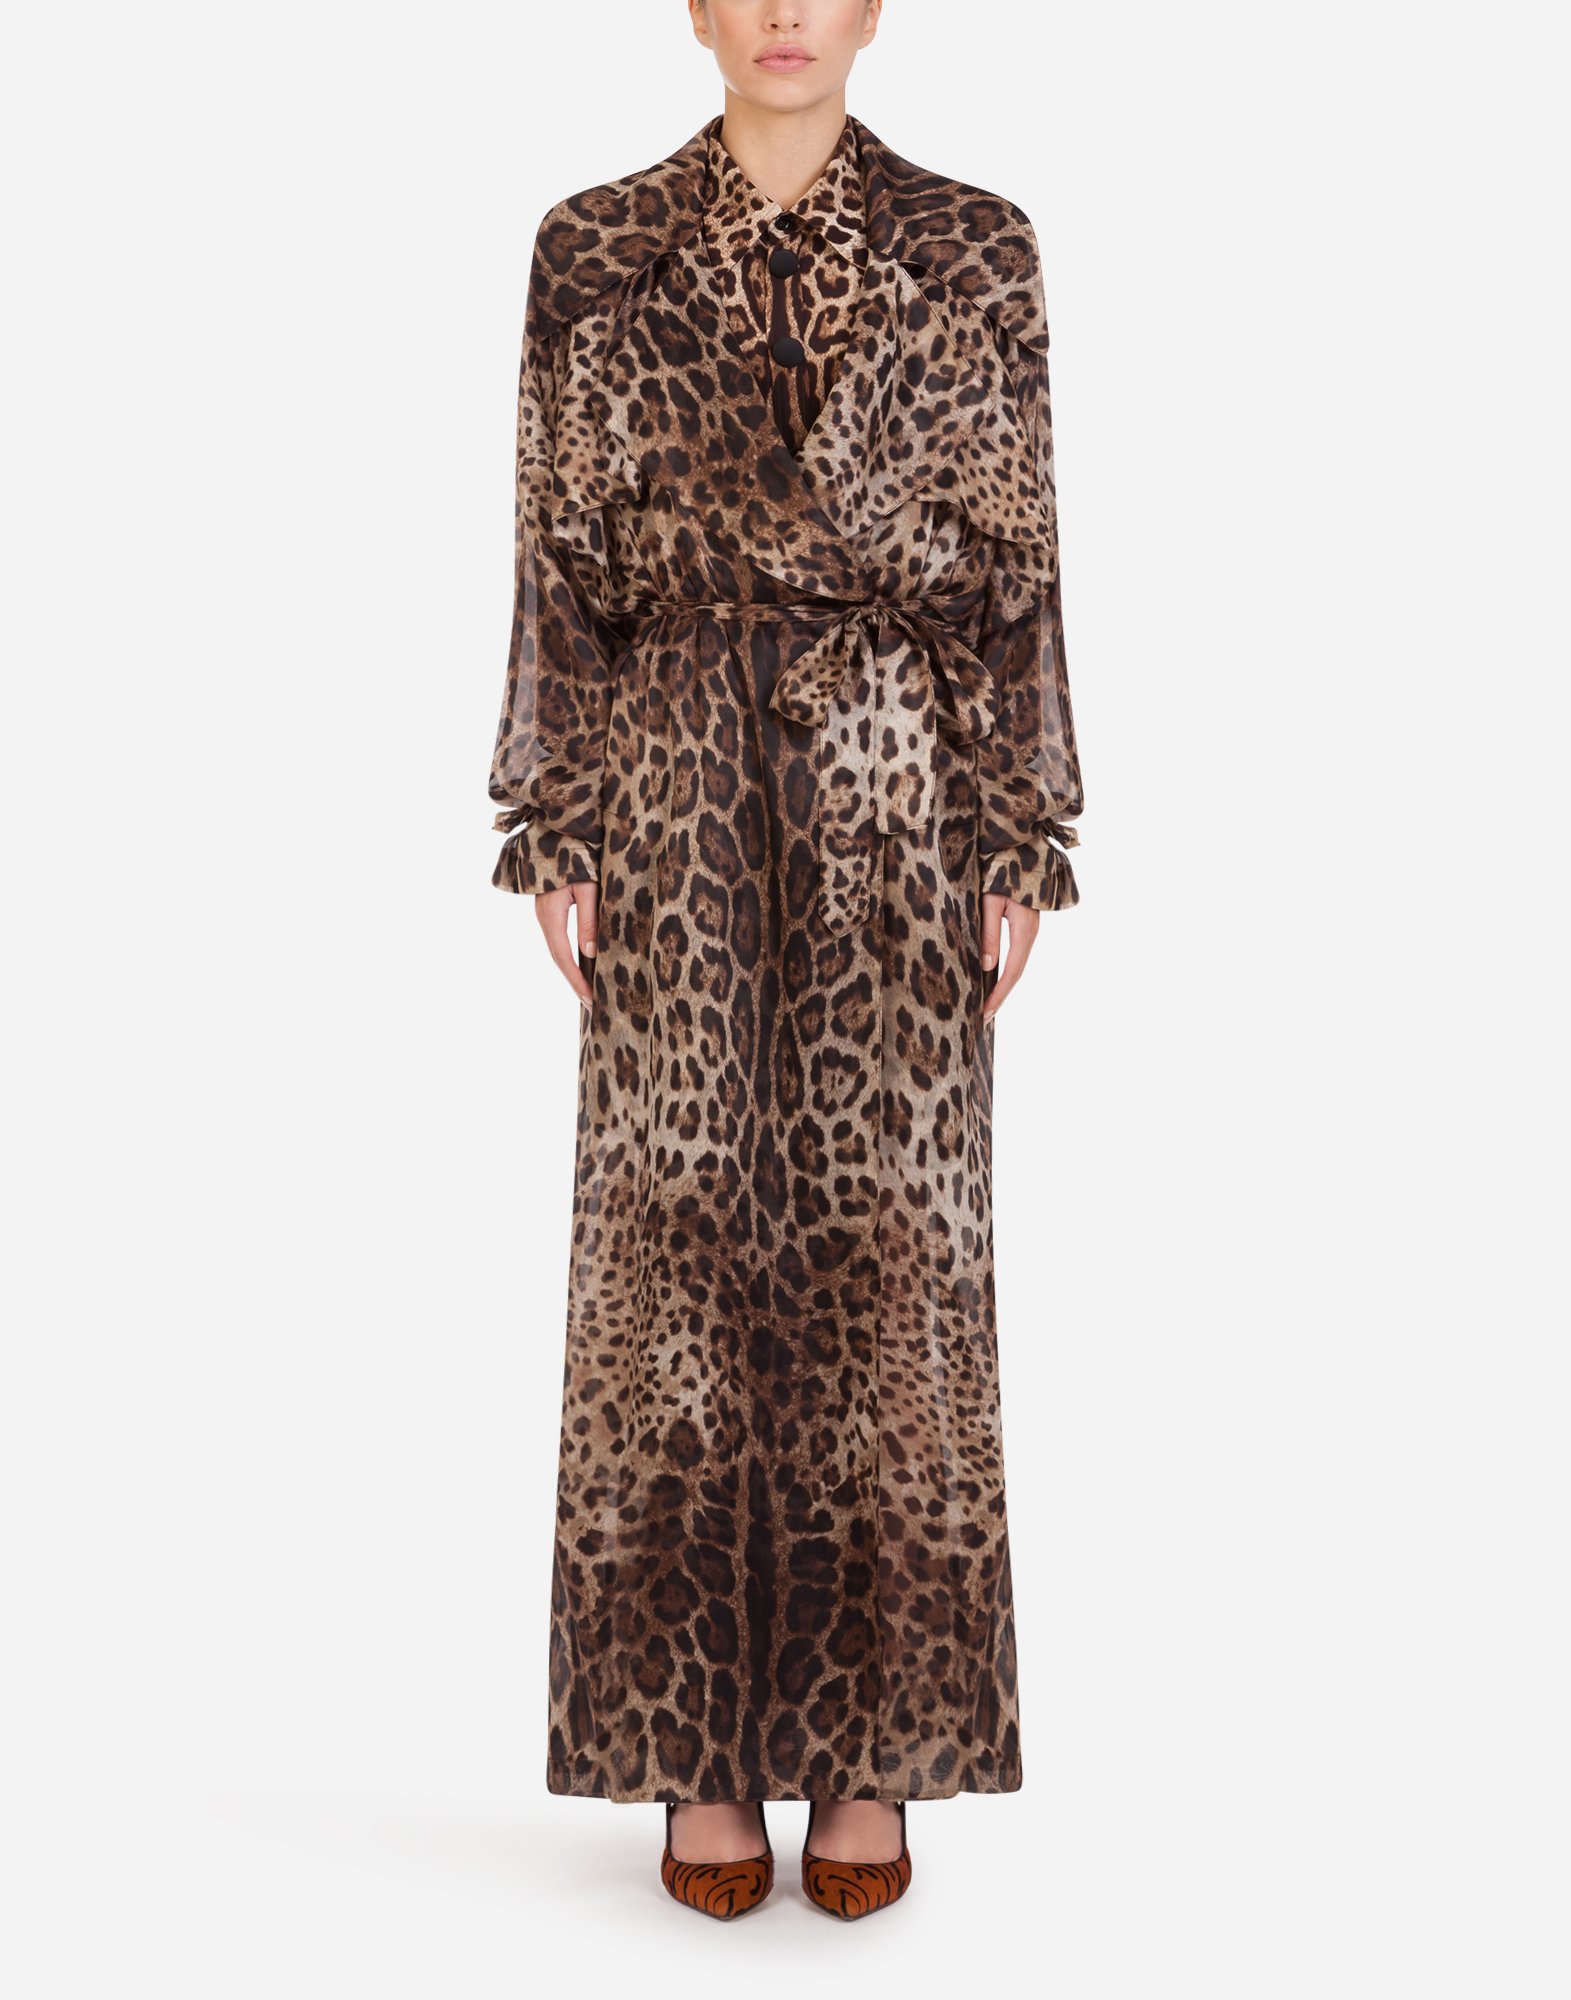 DOLCE & GABBANA ORGANZA TRENCH COAT WITH LEOPARD PRINT